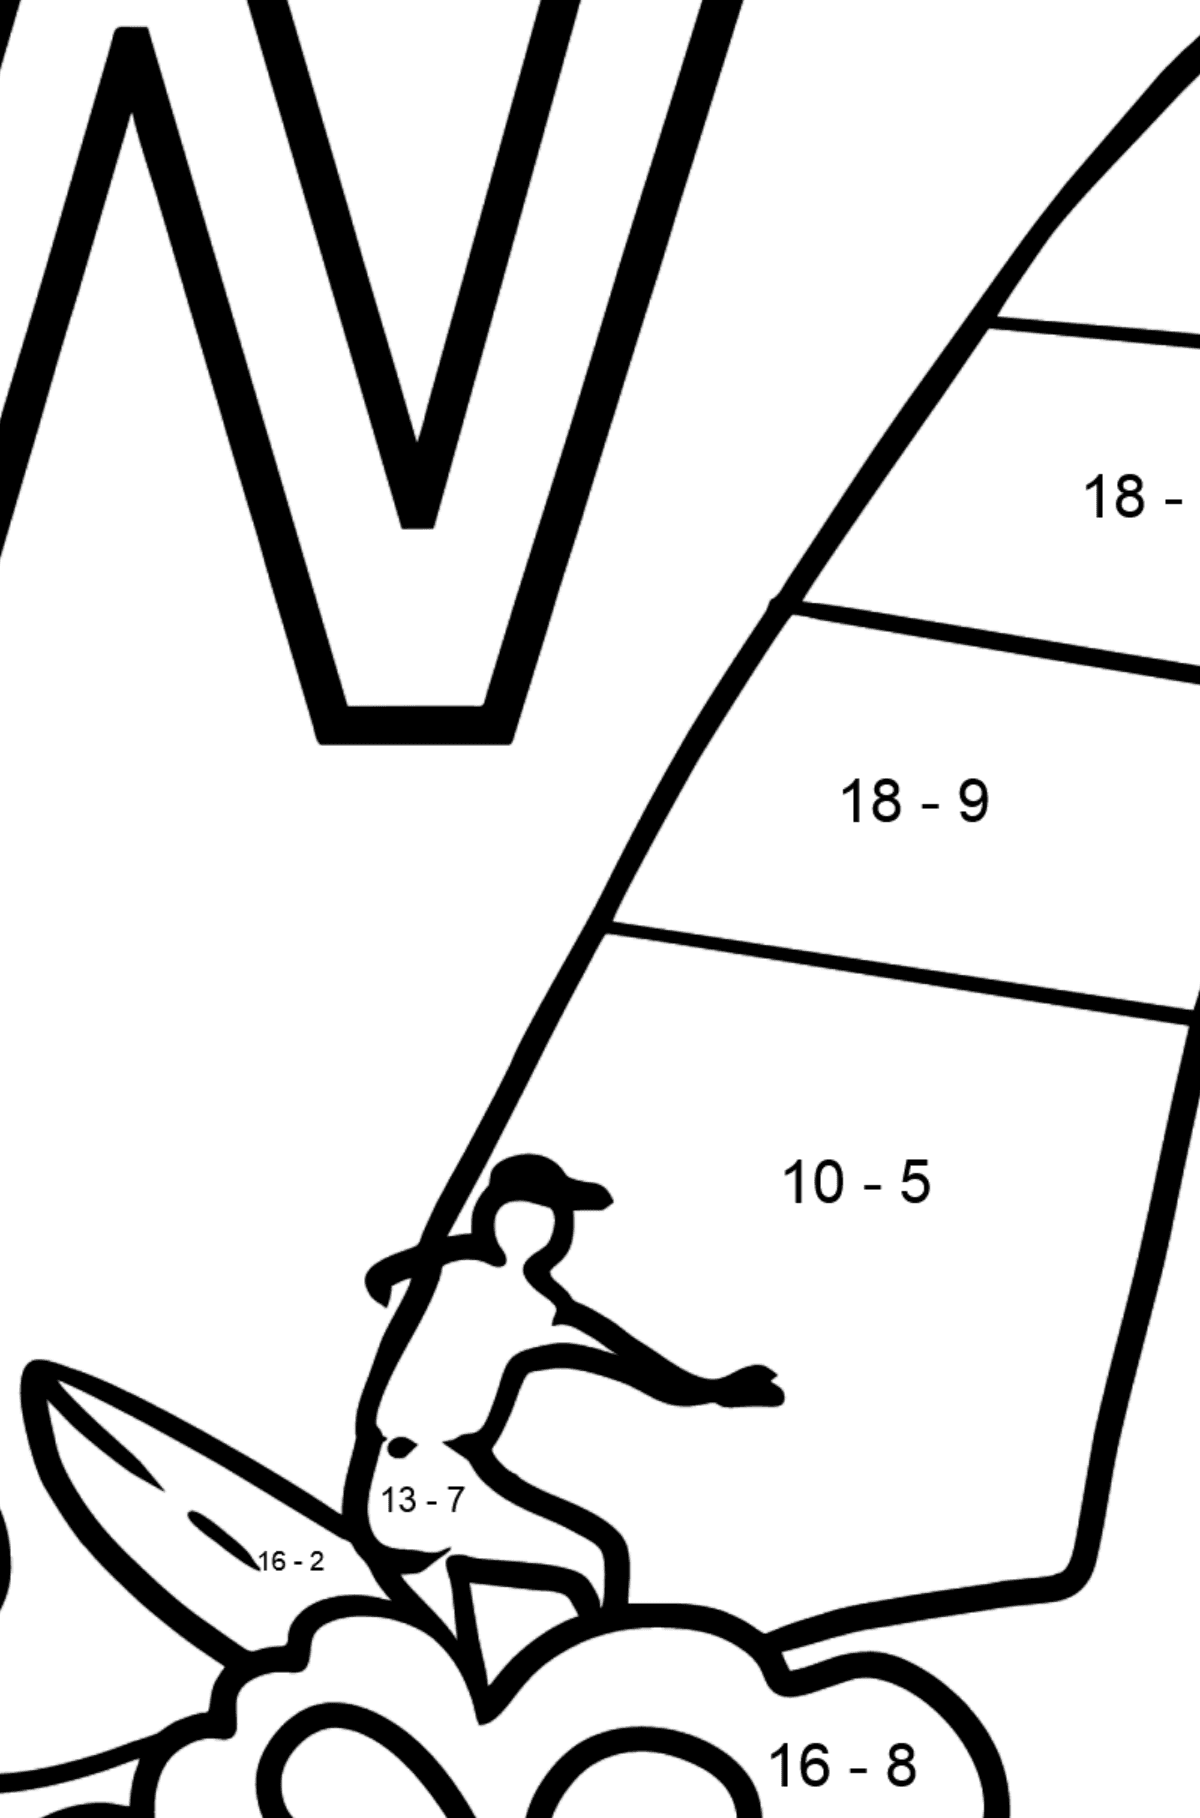 Portuguese Letter W coloring pages - WINDSURF - Math Coloring - Subtraction for Kids